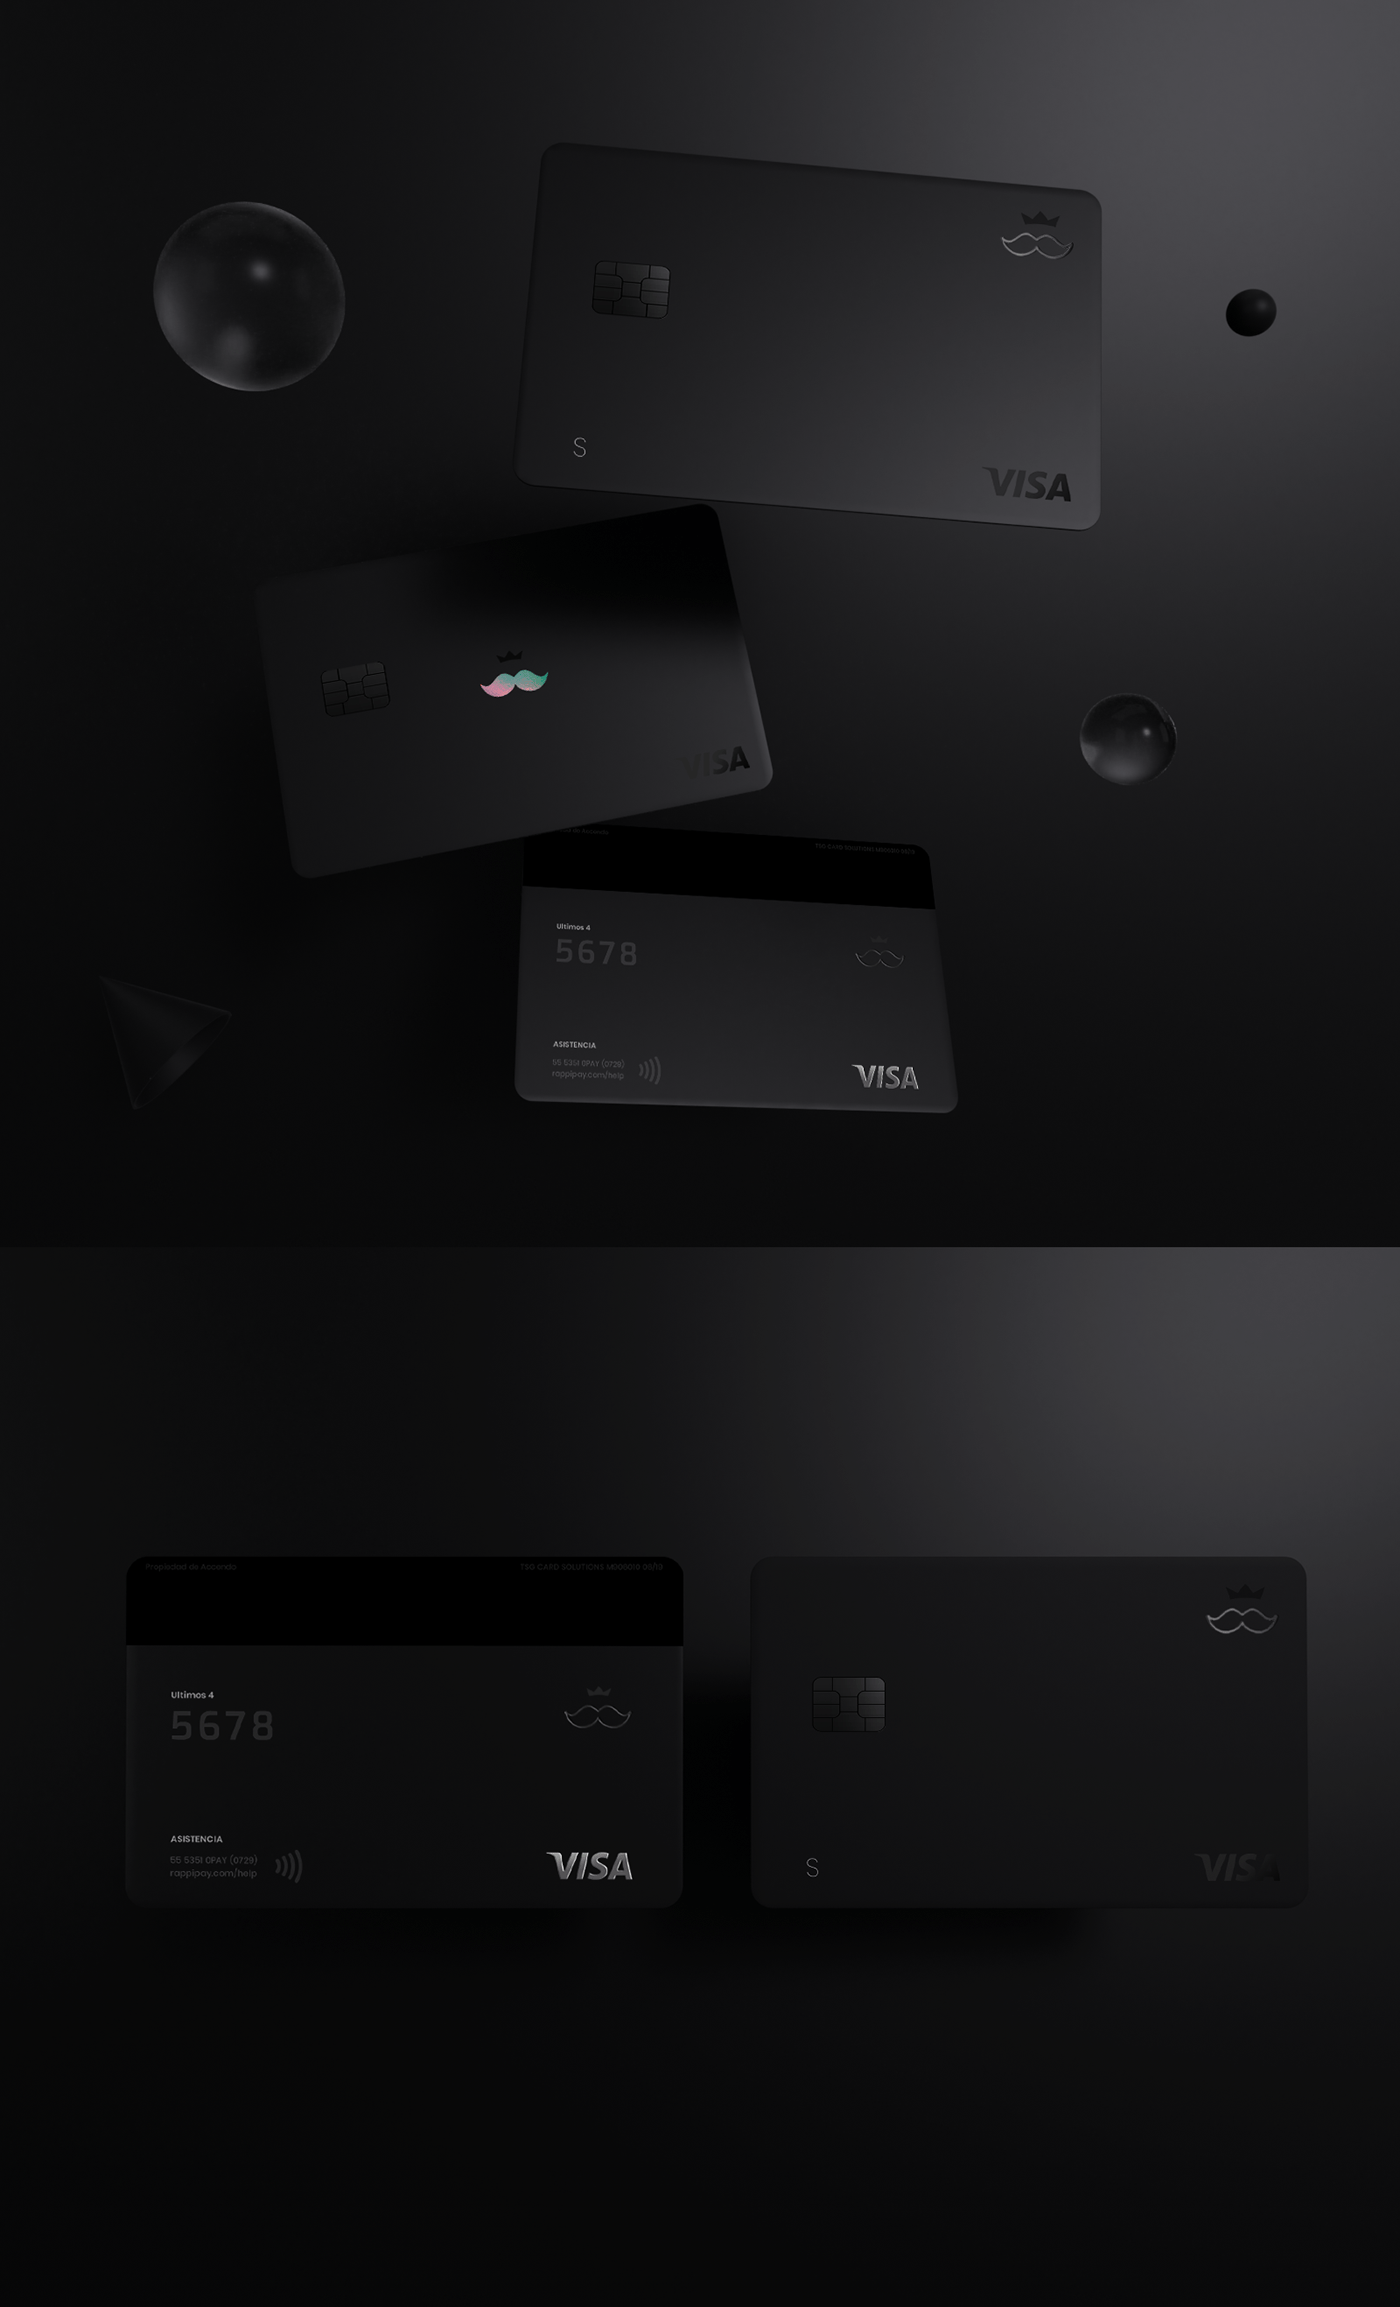 credit card rappi RAppiPay banking financial Debit card payment money Thor Credit Card Design